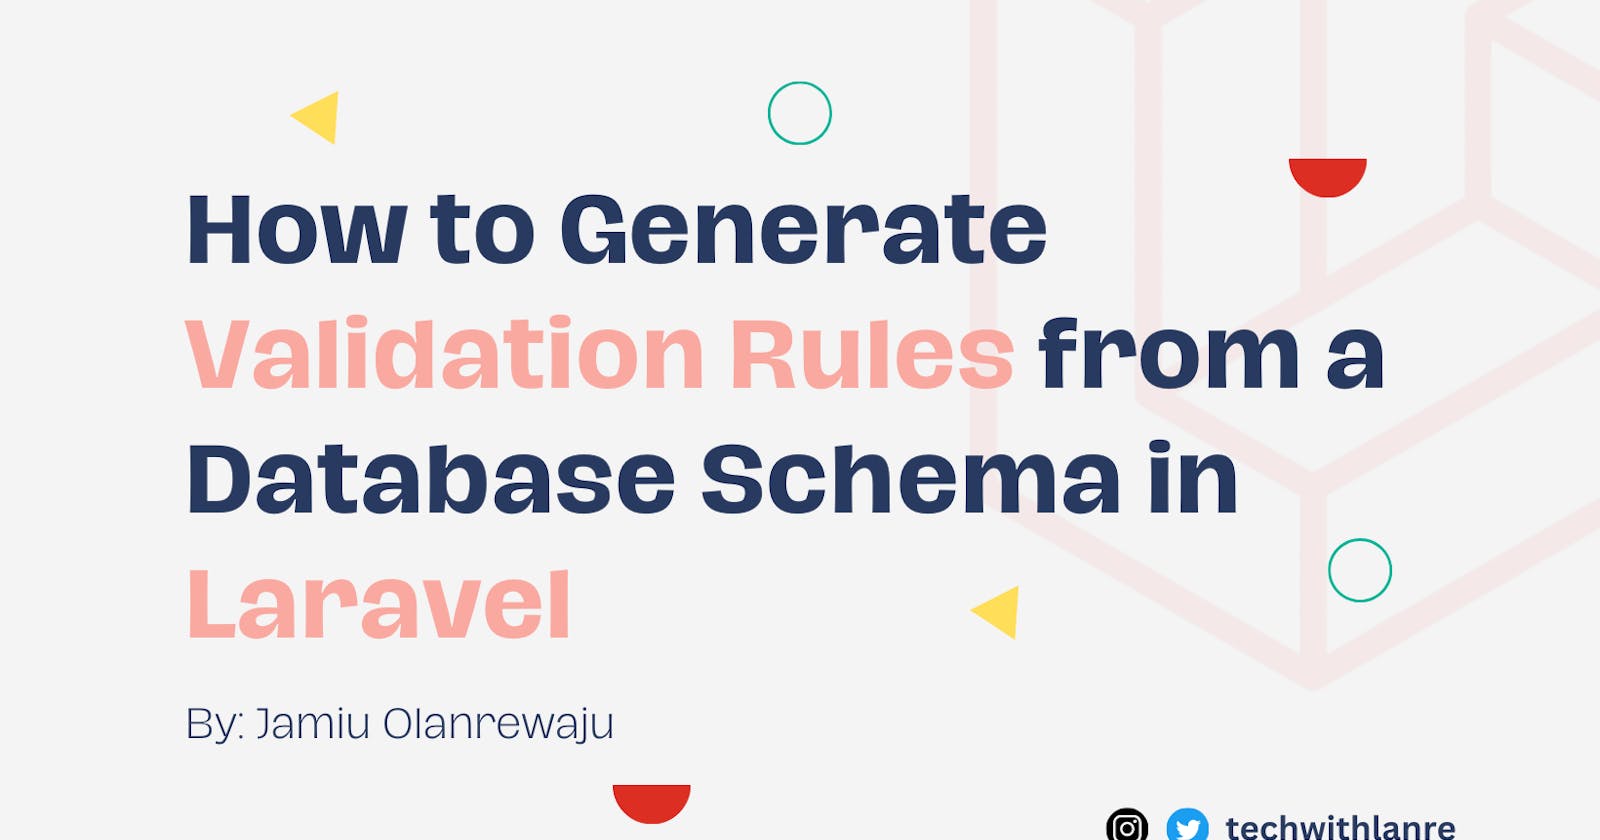 How to Generate Validation Rules from a Database Schema in Laravel